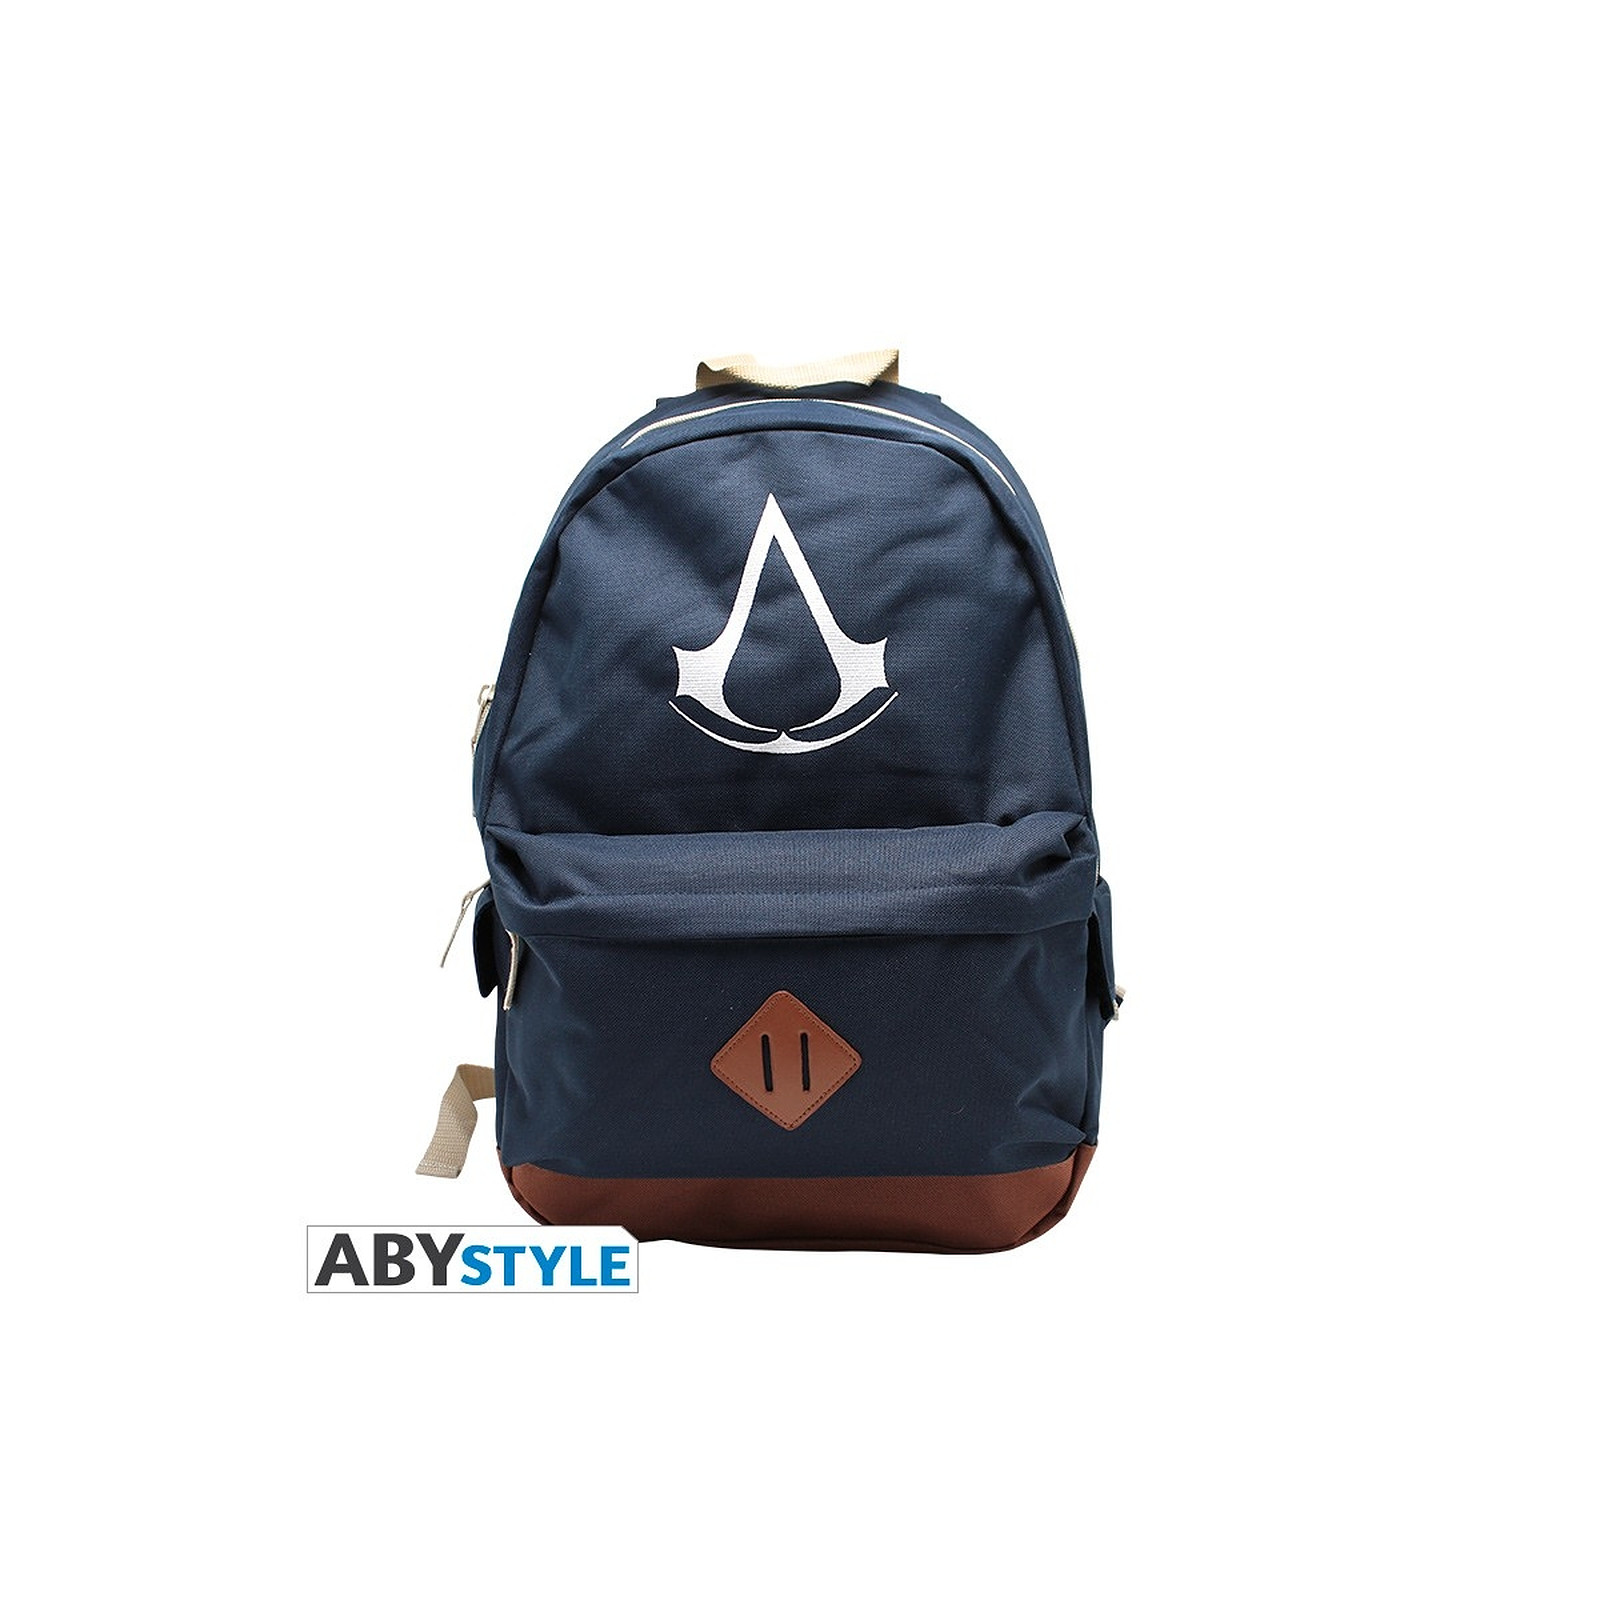 ASSASSIN'S CREED - Sac a  dos Crest - Sac a  dos Abystyle